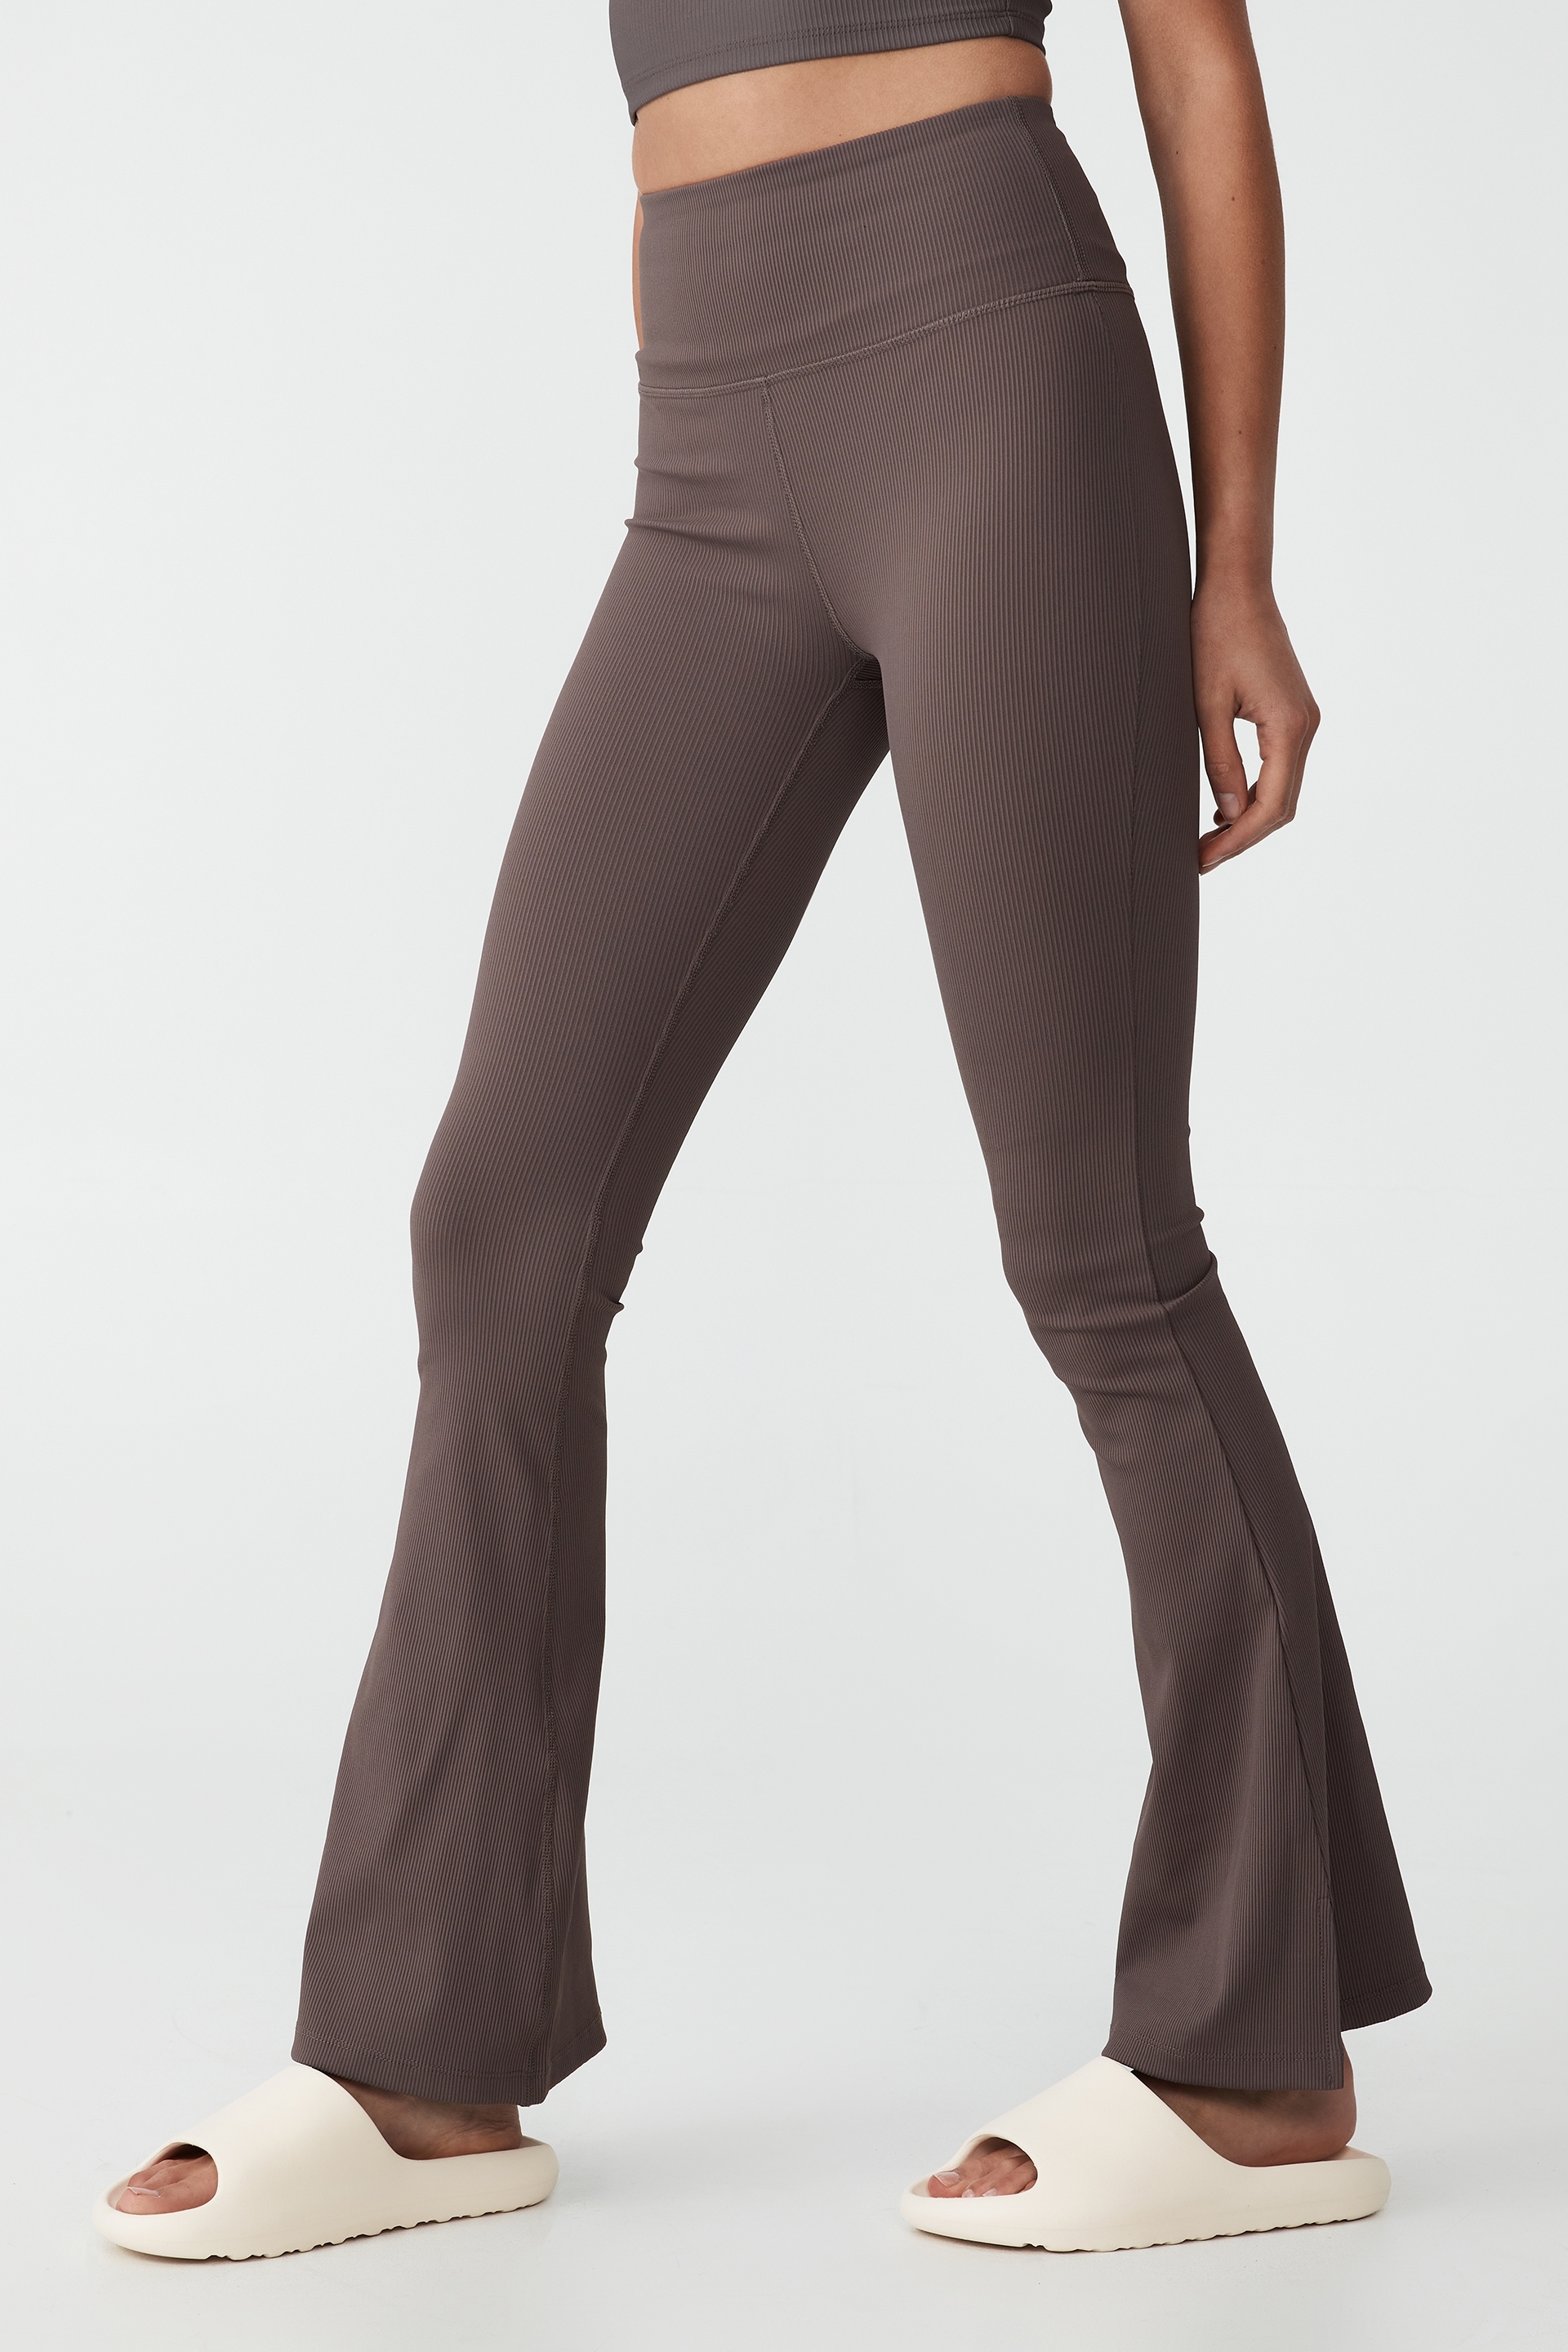 Ribbed Organic Cotton Flared Pants // Chocolate - Adult's - The